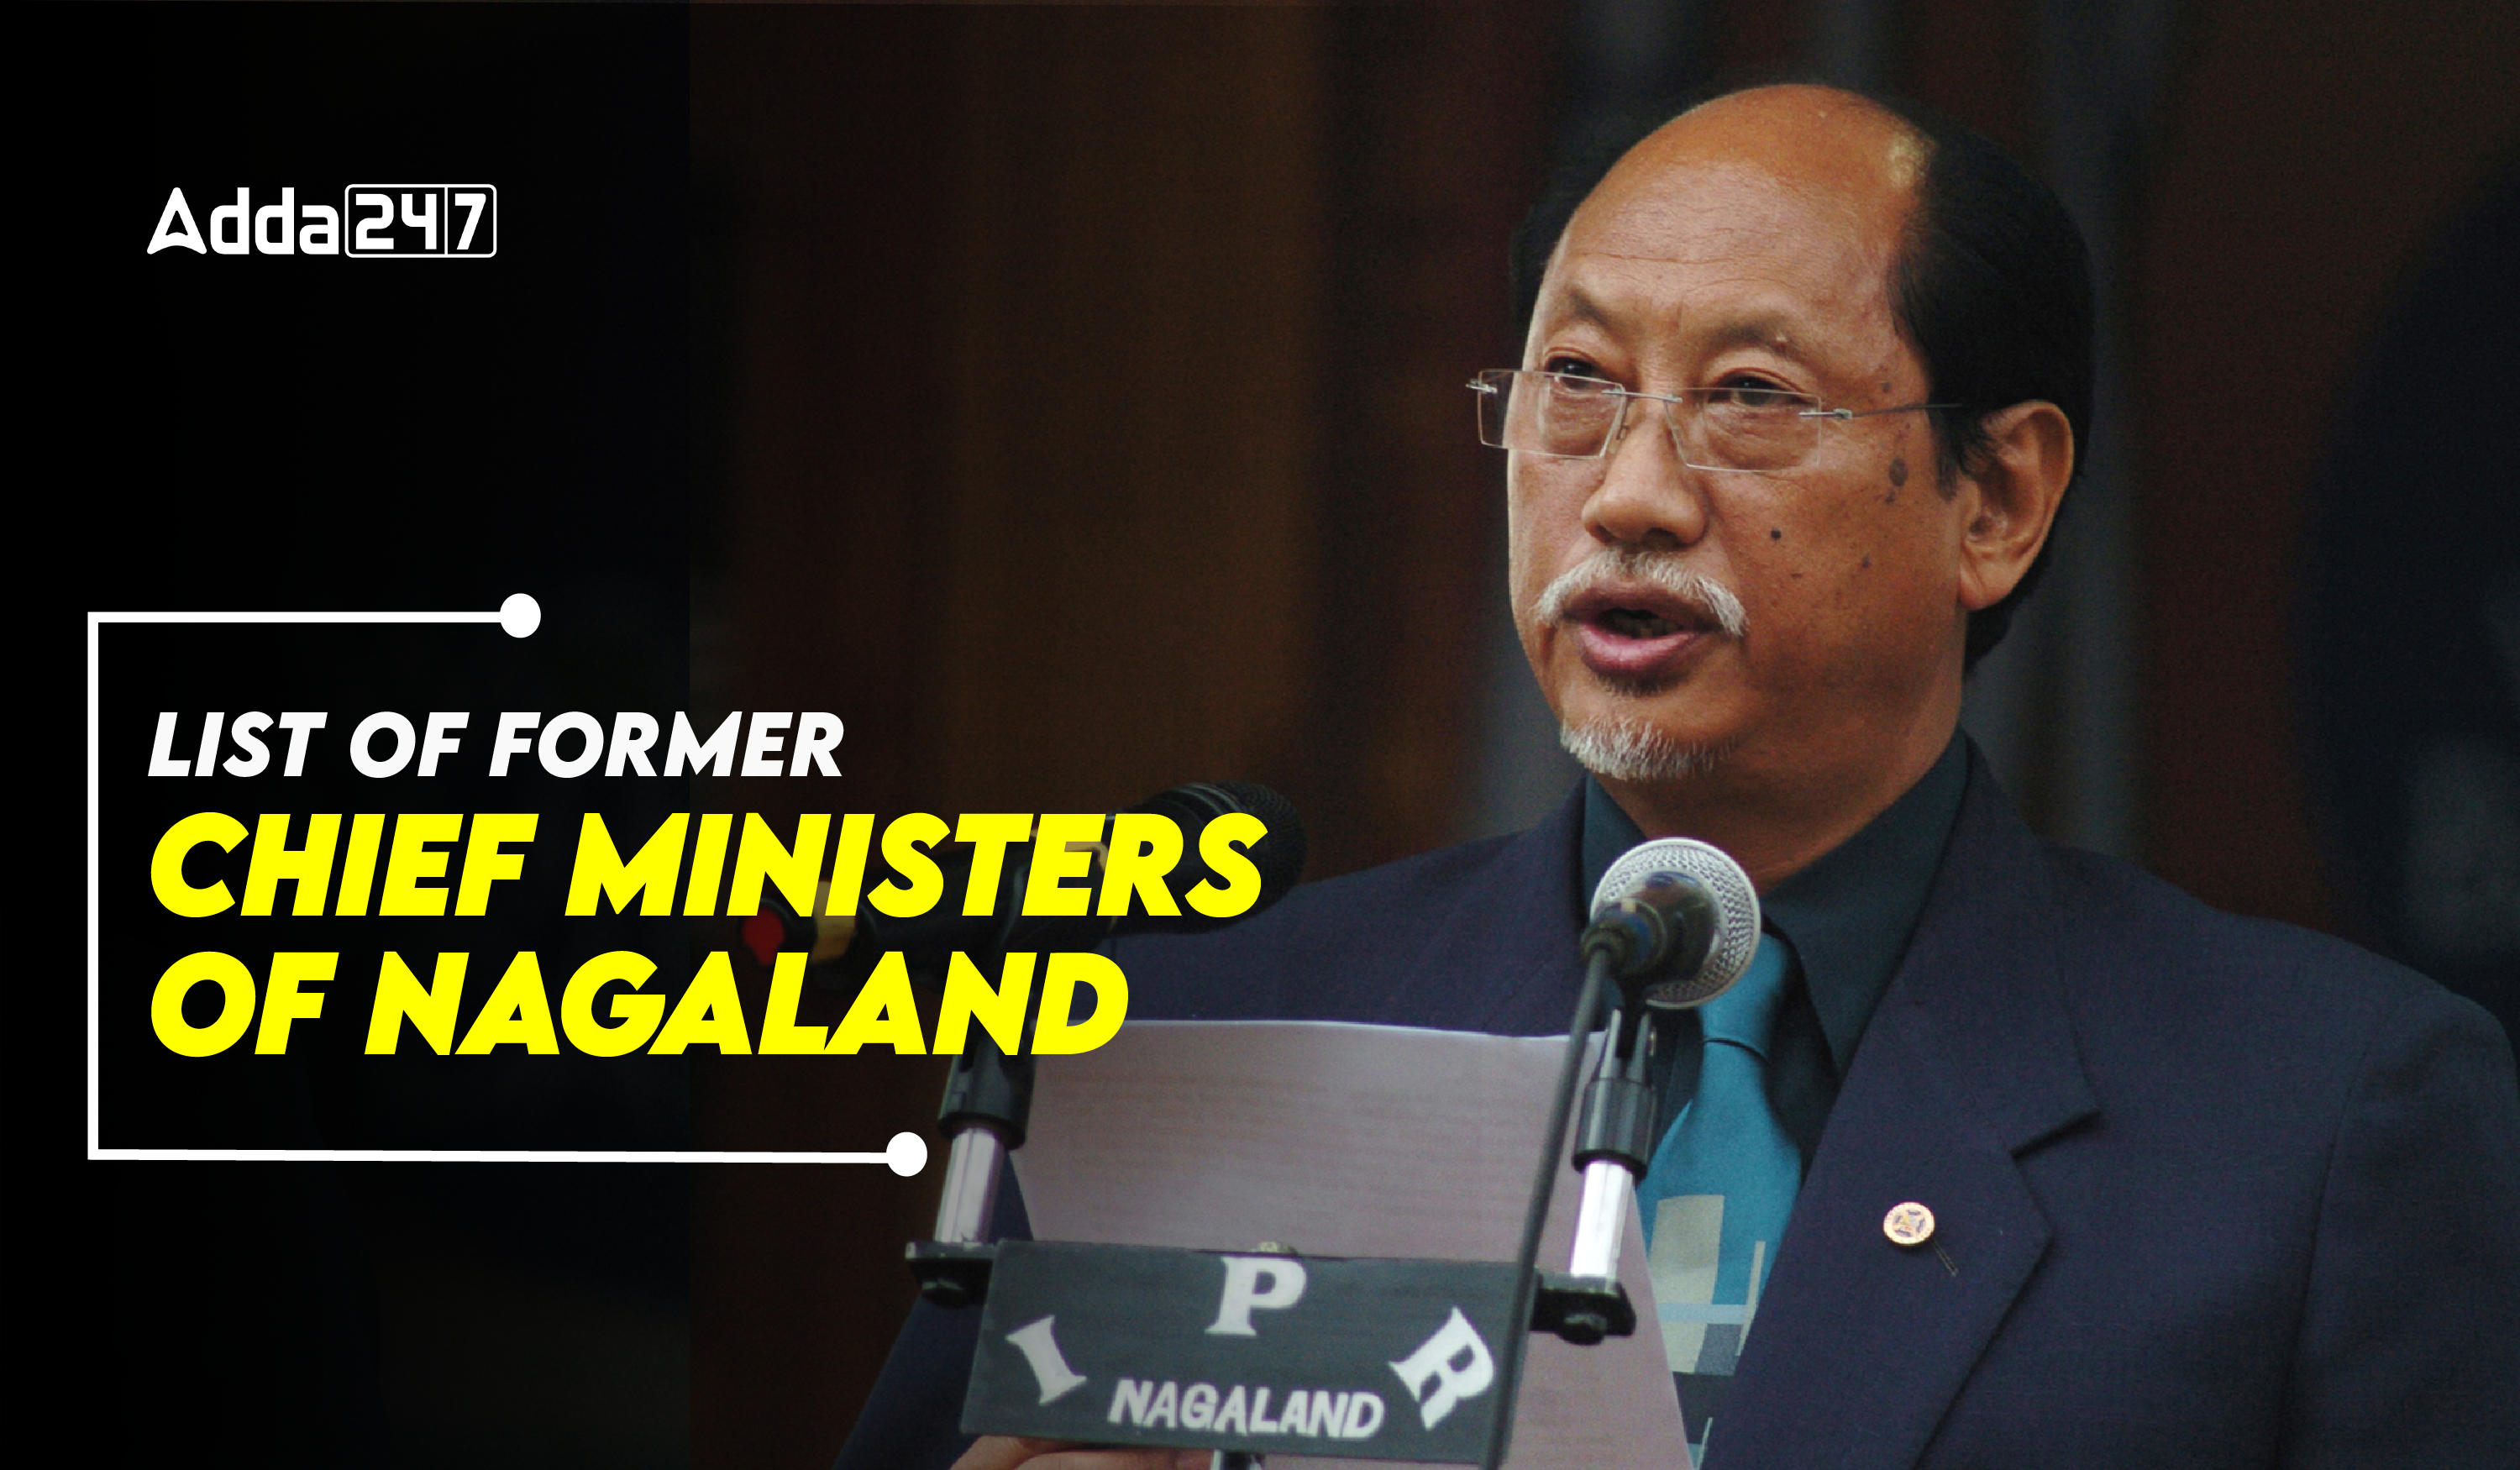 List of Former Chief Ministers of Nagaland